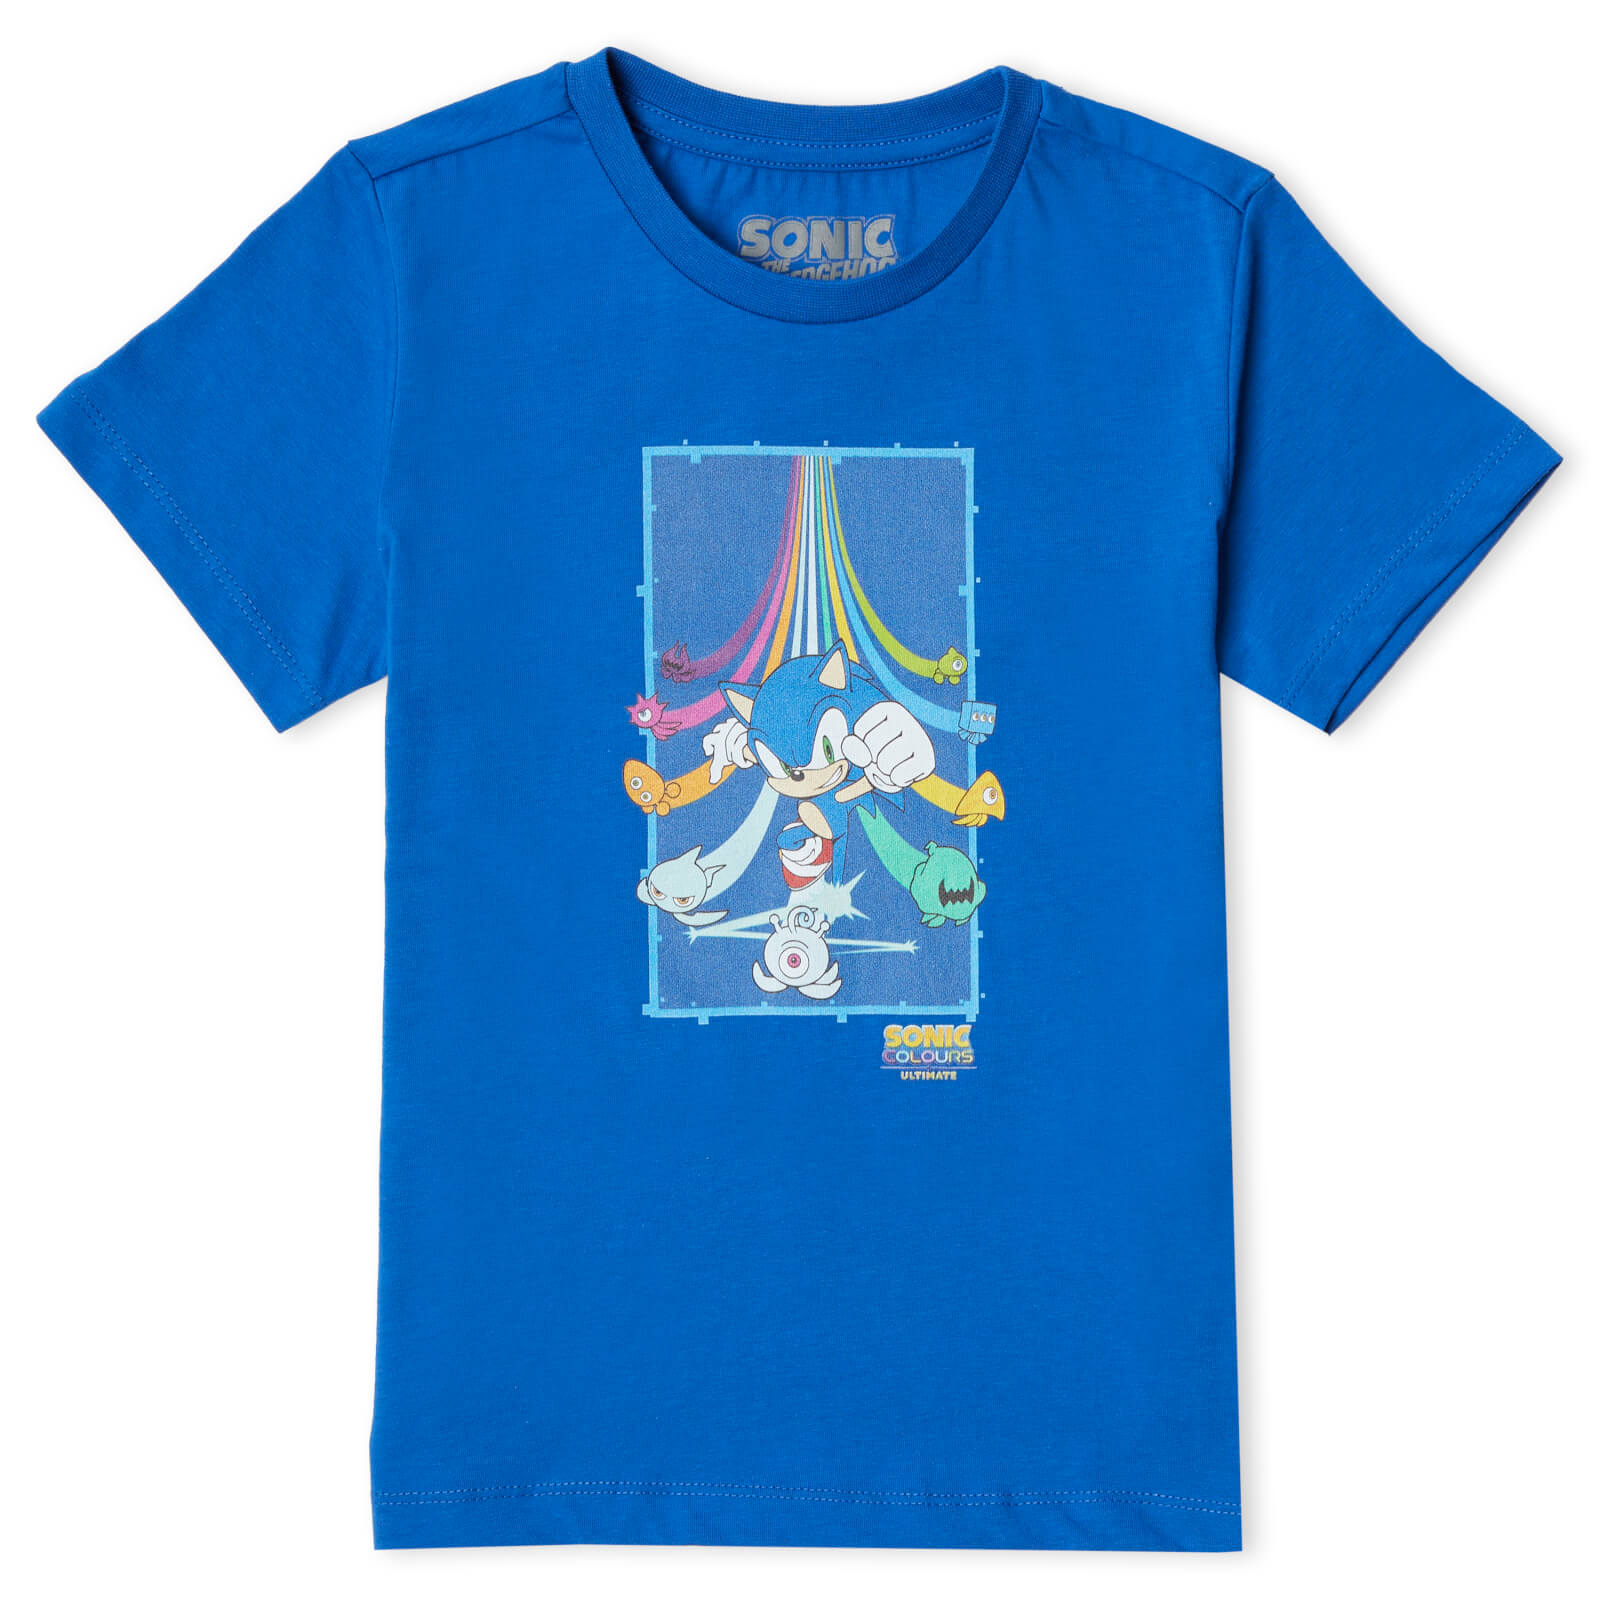 Sonic The Hedgehog Colours Ultimate Kids' T-Shirt - Blue - 3-4 Years - Blue